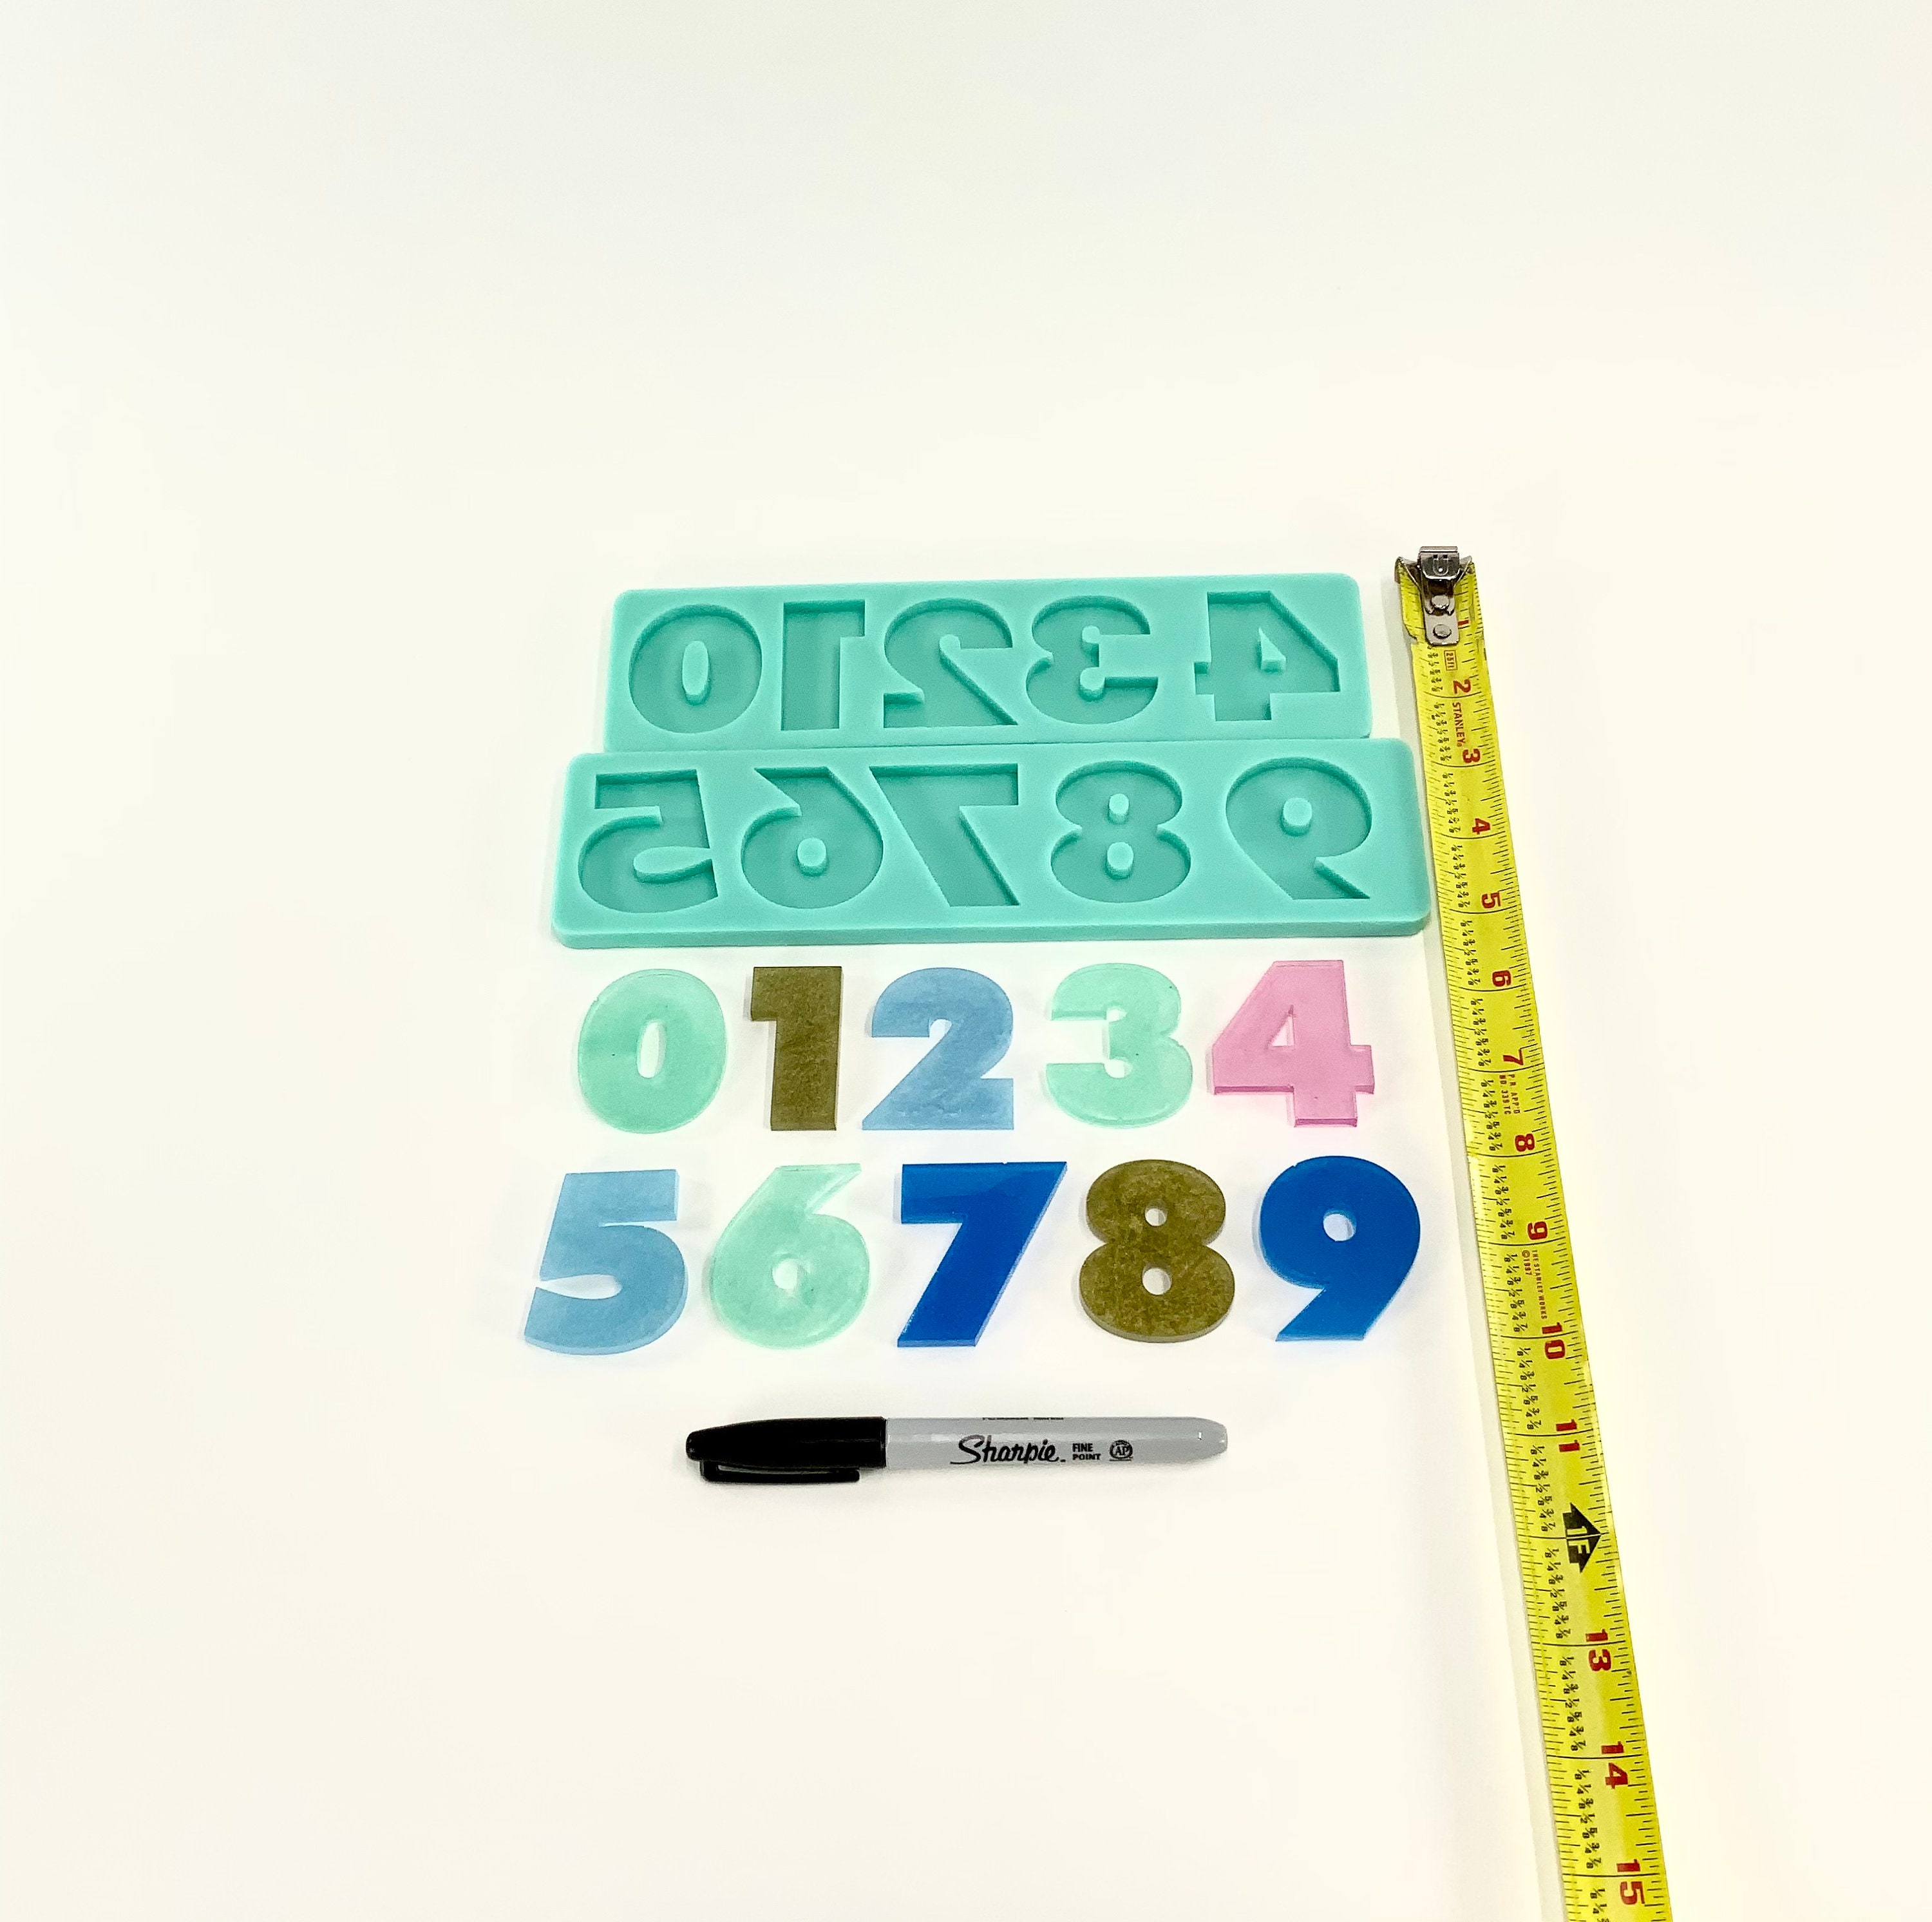 Alphabet Mold, Numbers Mold, Full Reverse